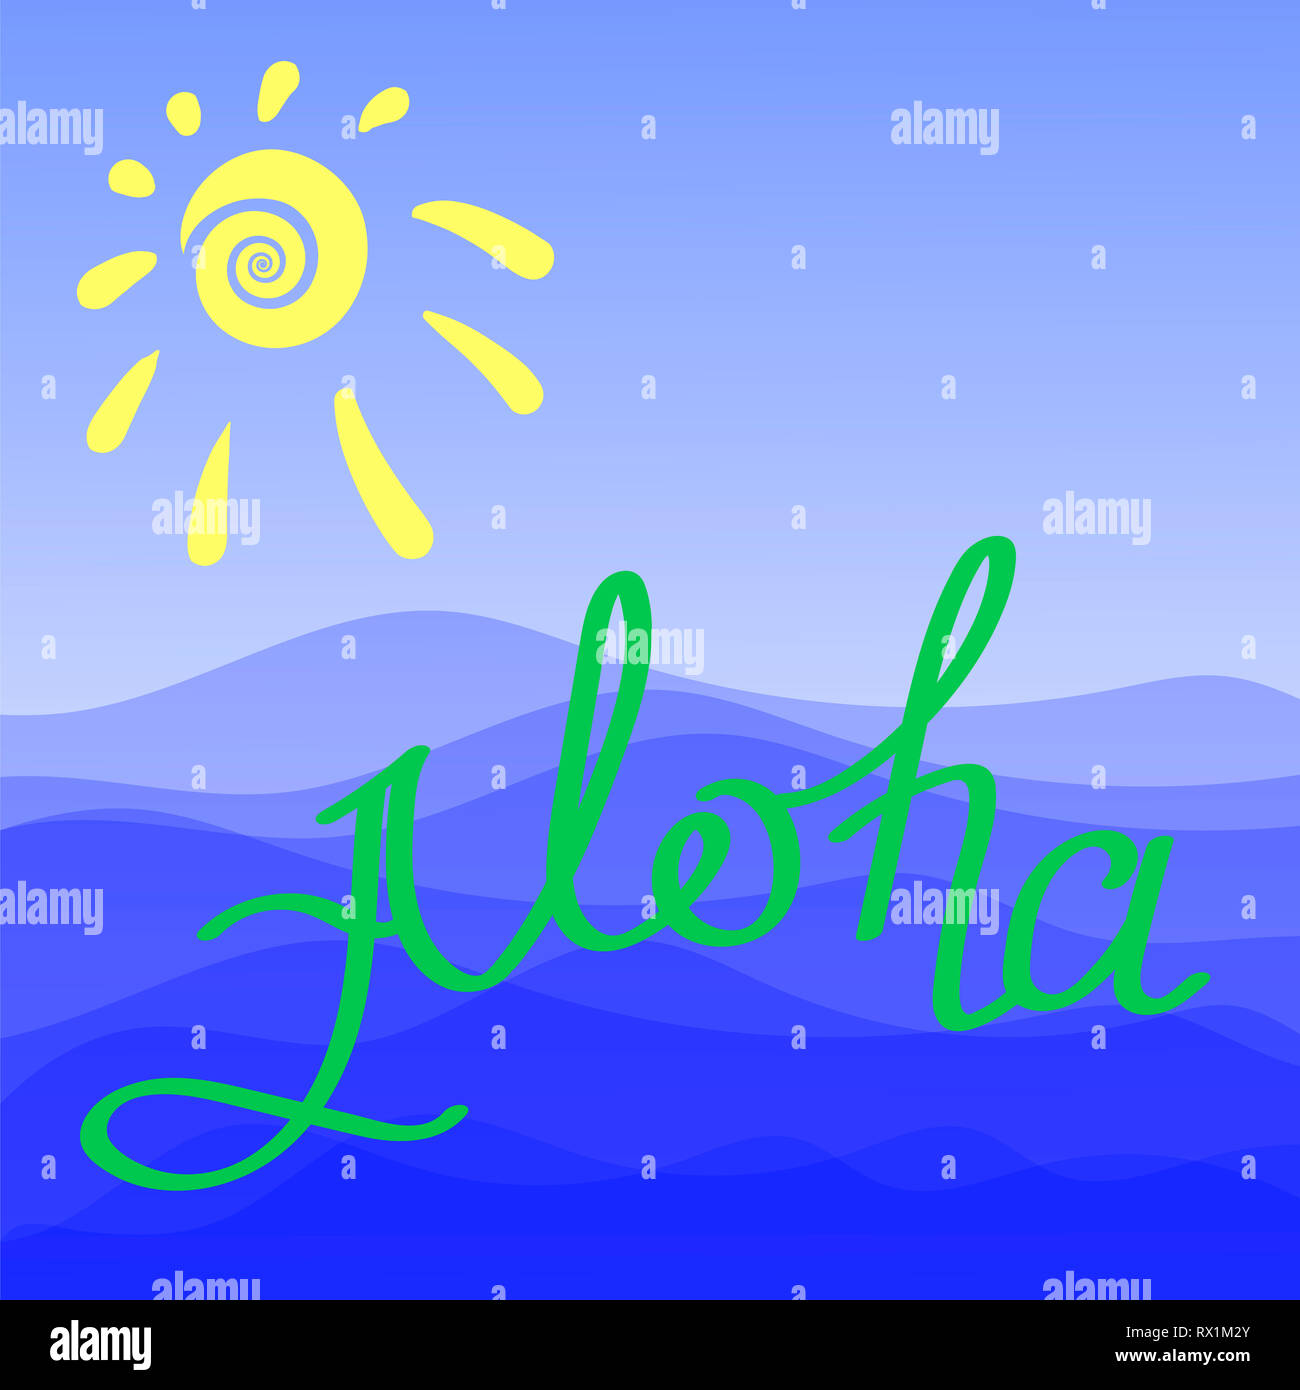 Lettering Aloha Text with Sea and Sun on Blue Sky Backround. Hand Sketched Aloha Typography Sign Stock Photo